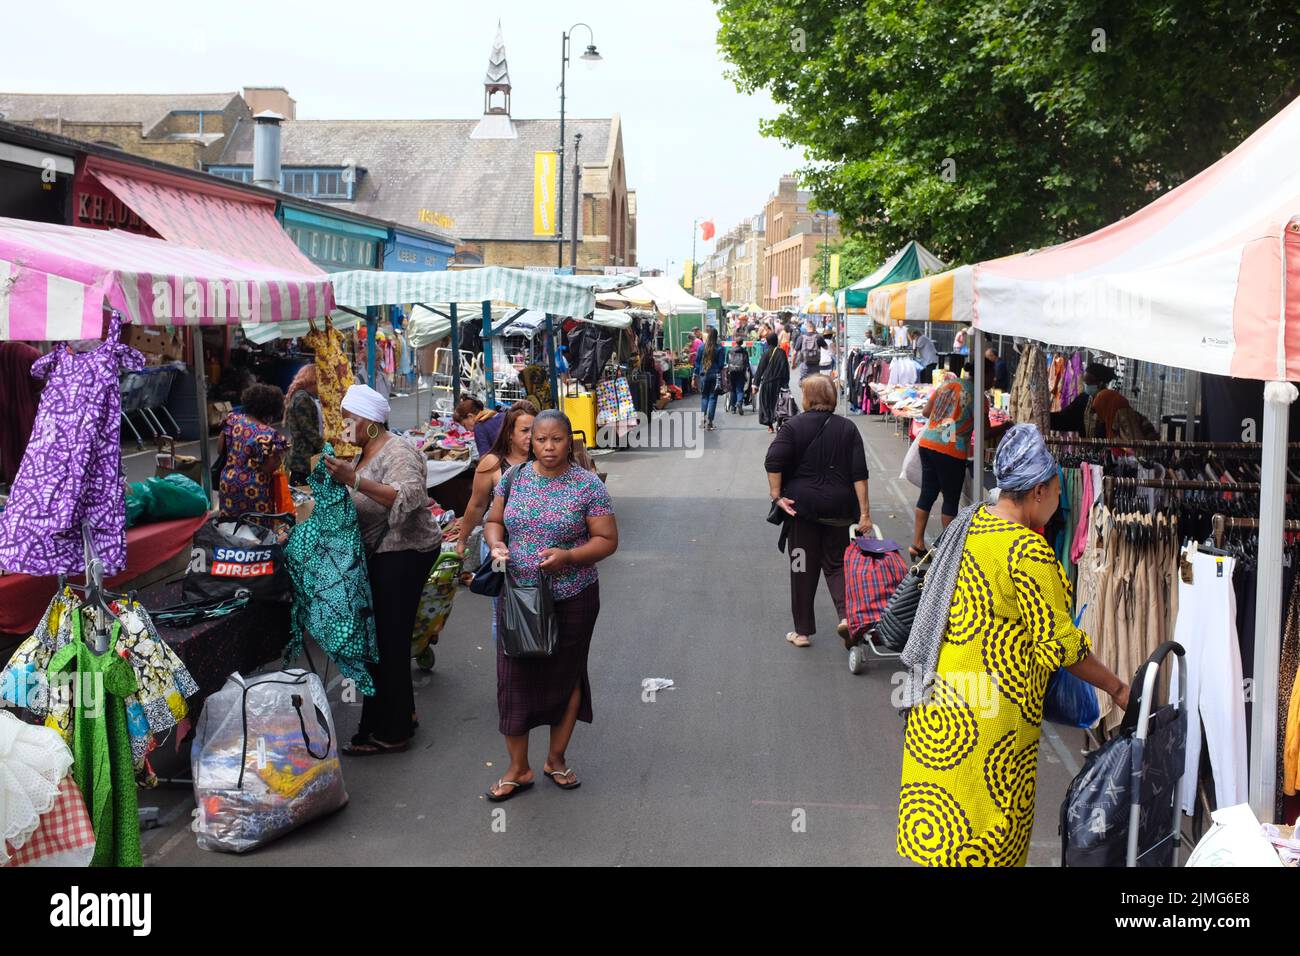 East Street Market, known by locals as 'The Lane,' or 'East Lane,' is a street market in Walworth, south London. Stock Photo